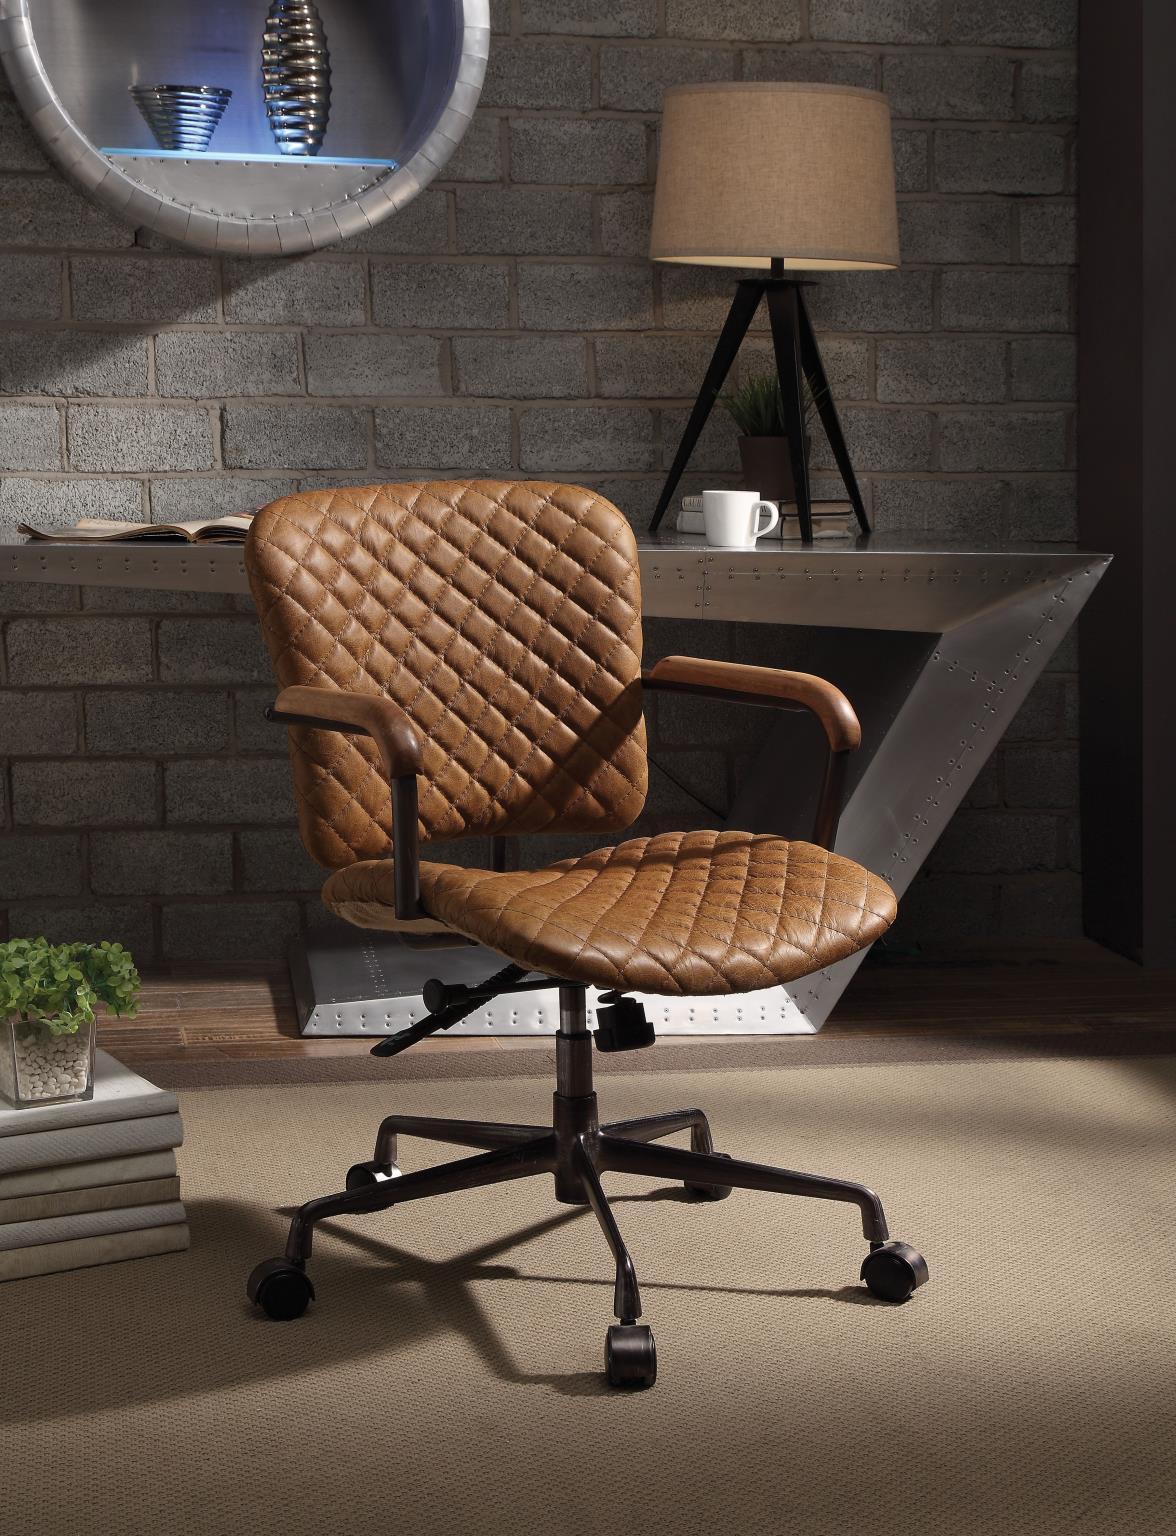 

    
Home Office Executive Chair Coffee Genuine Leather Josi 92029 Acme Industrial
